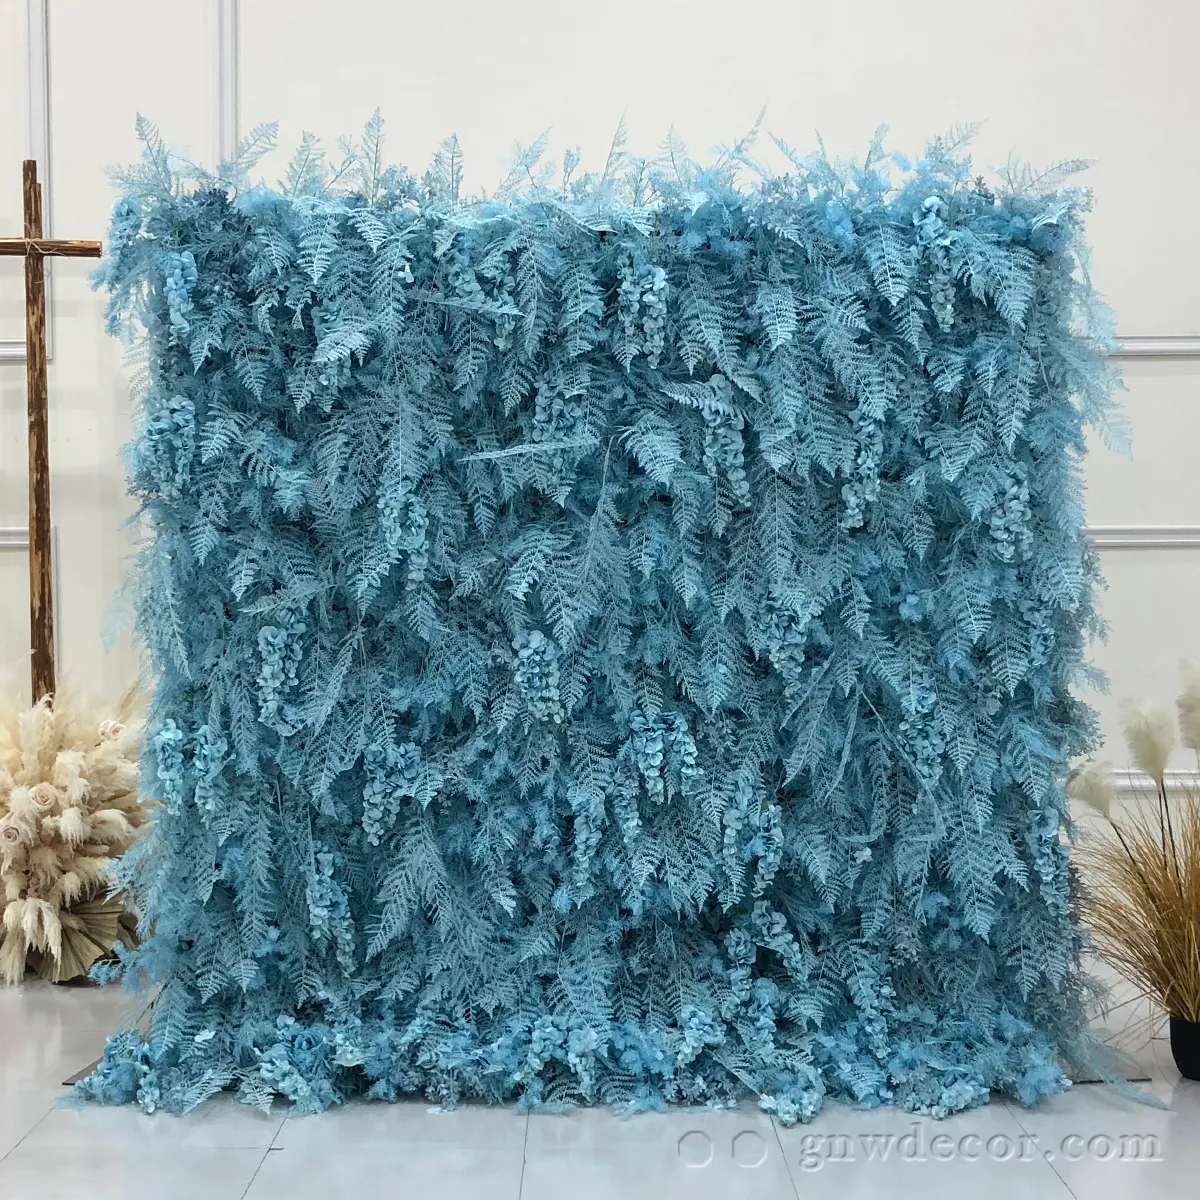 GNW Very 3D Custom Blue Feather Wedding Decor Flower Wall Artificial Floral Panel Flower Wall Backdrop